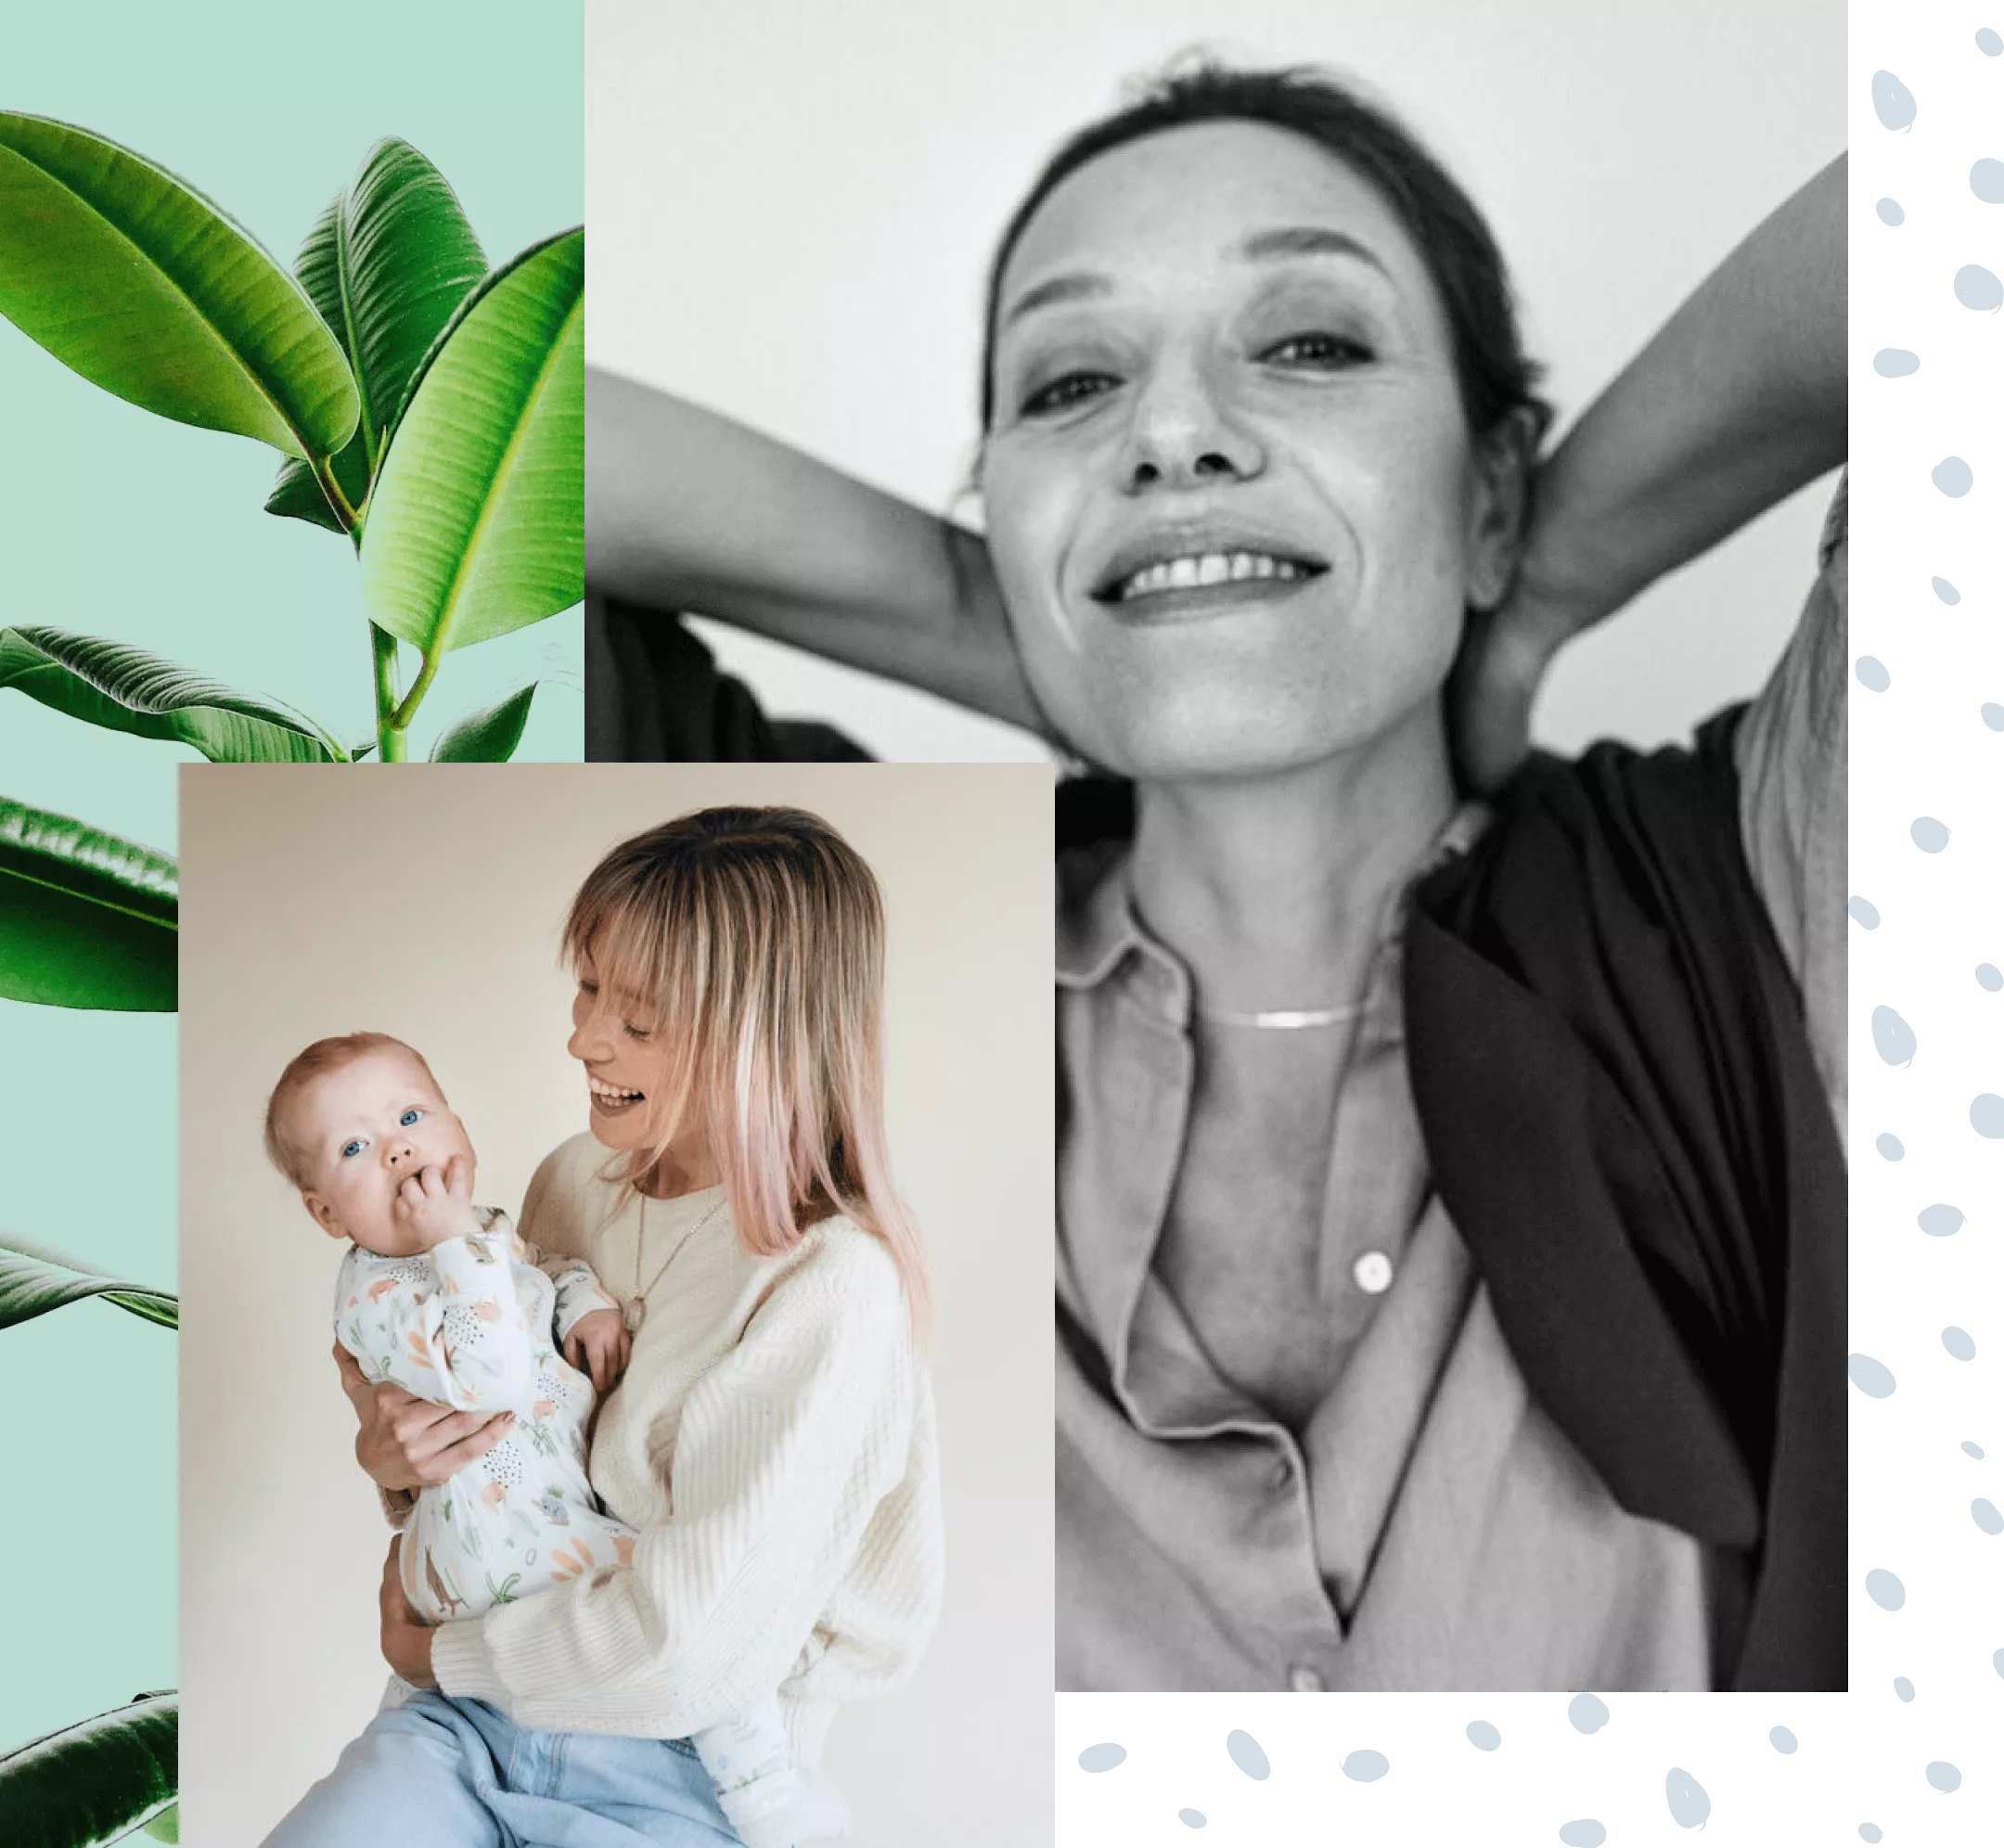 Woman smiling, mother with baby, plant